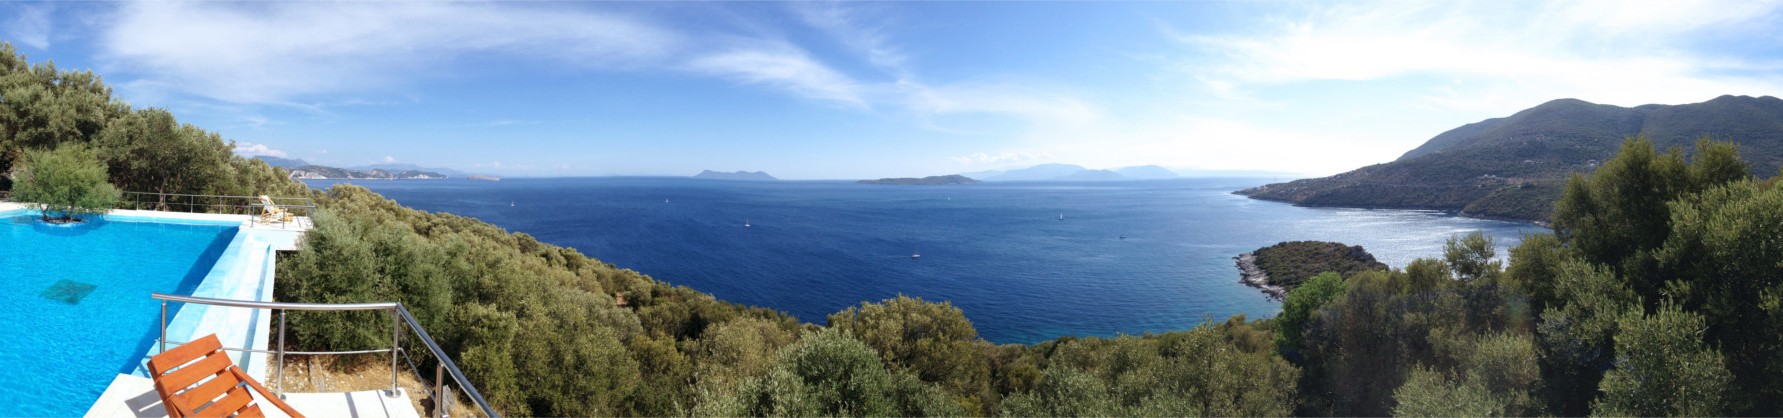 Panoramic view from villa